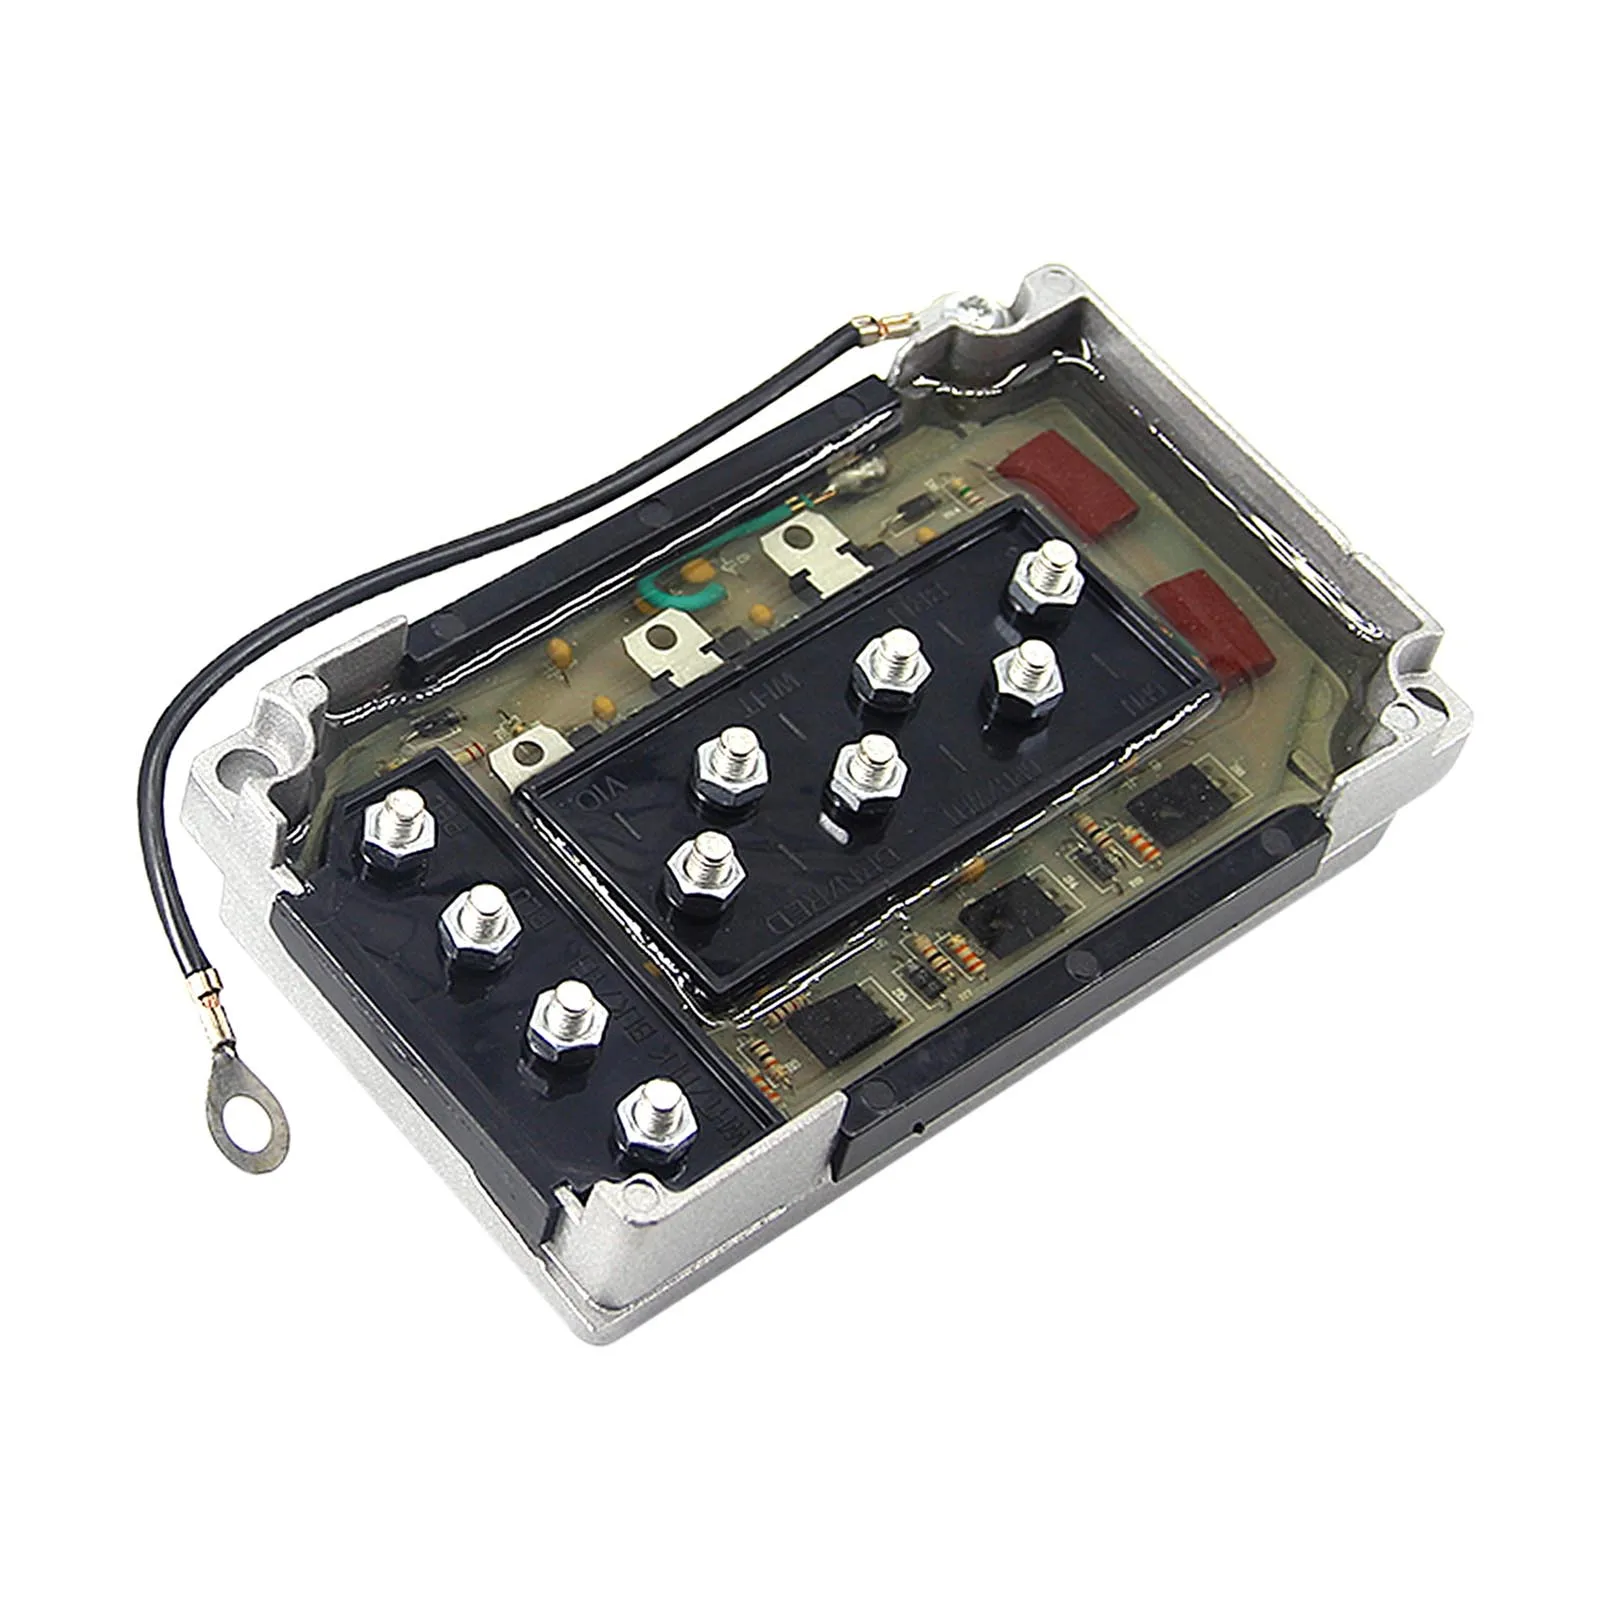 CDI Switch Box for Mercury 50-275 HP Outboard Motor Power Pack 332-7778A12 332-7778A6 332-7778A3 332-5524A1 332-7778A7